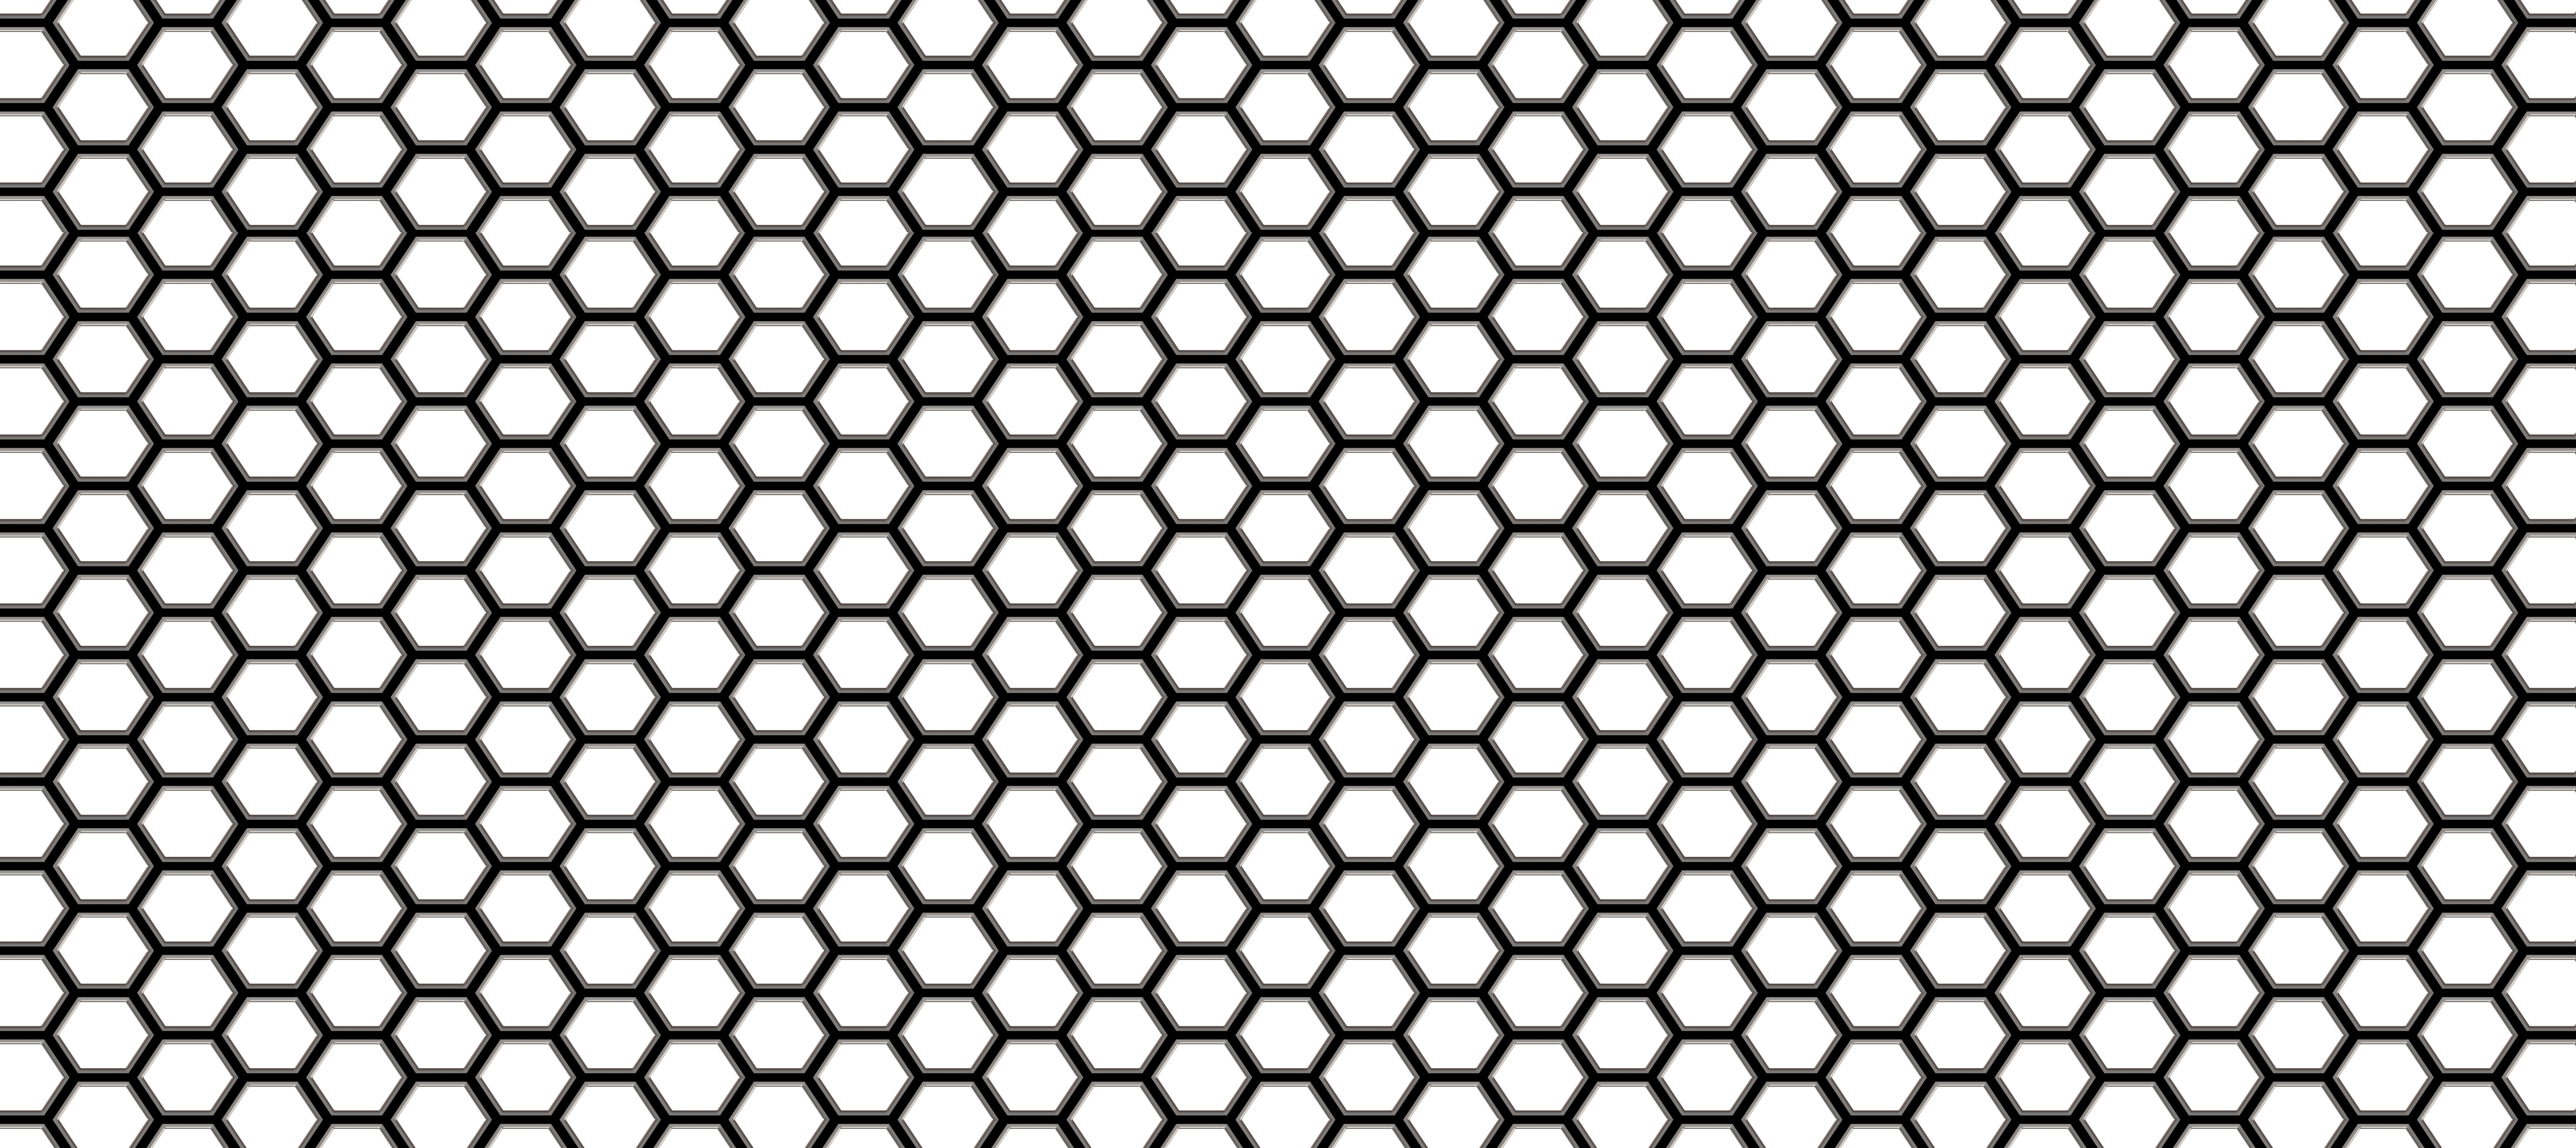 Black and white structure. Hexagon clipart honeycomb